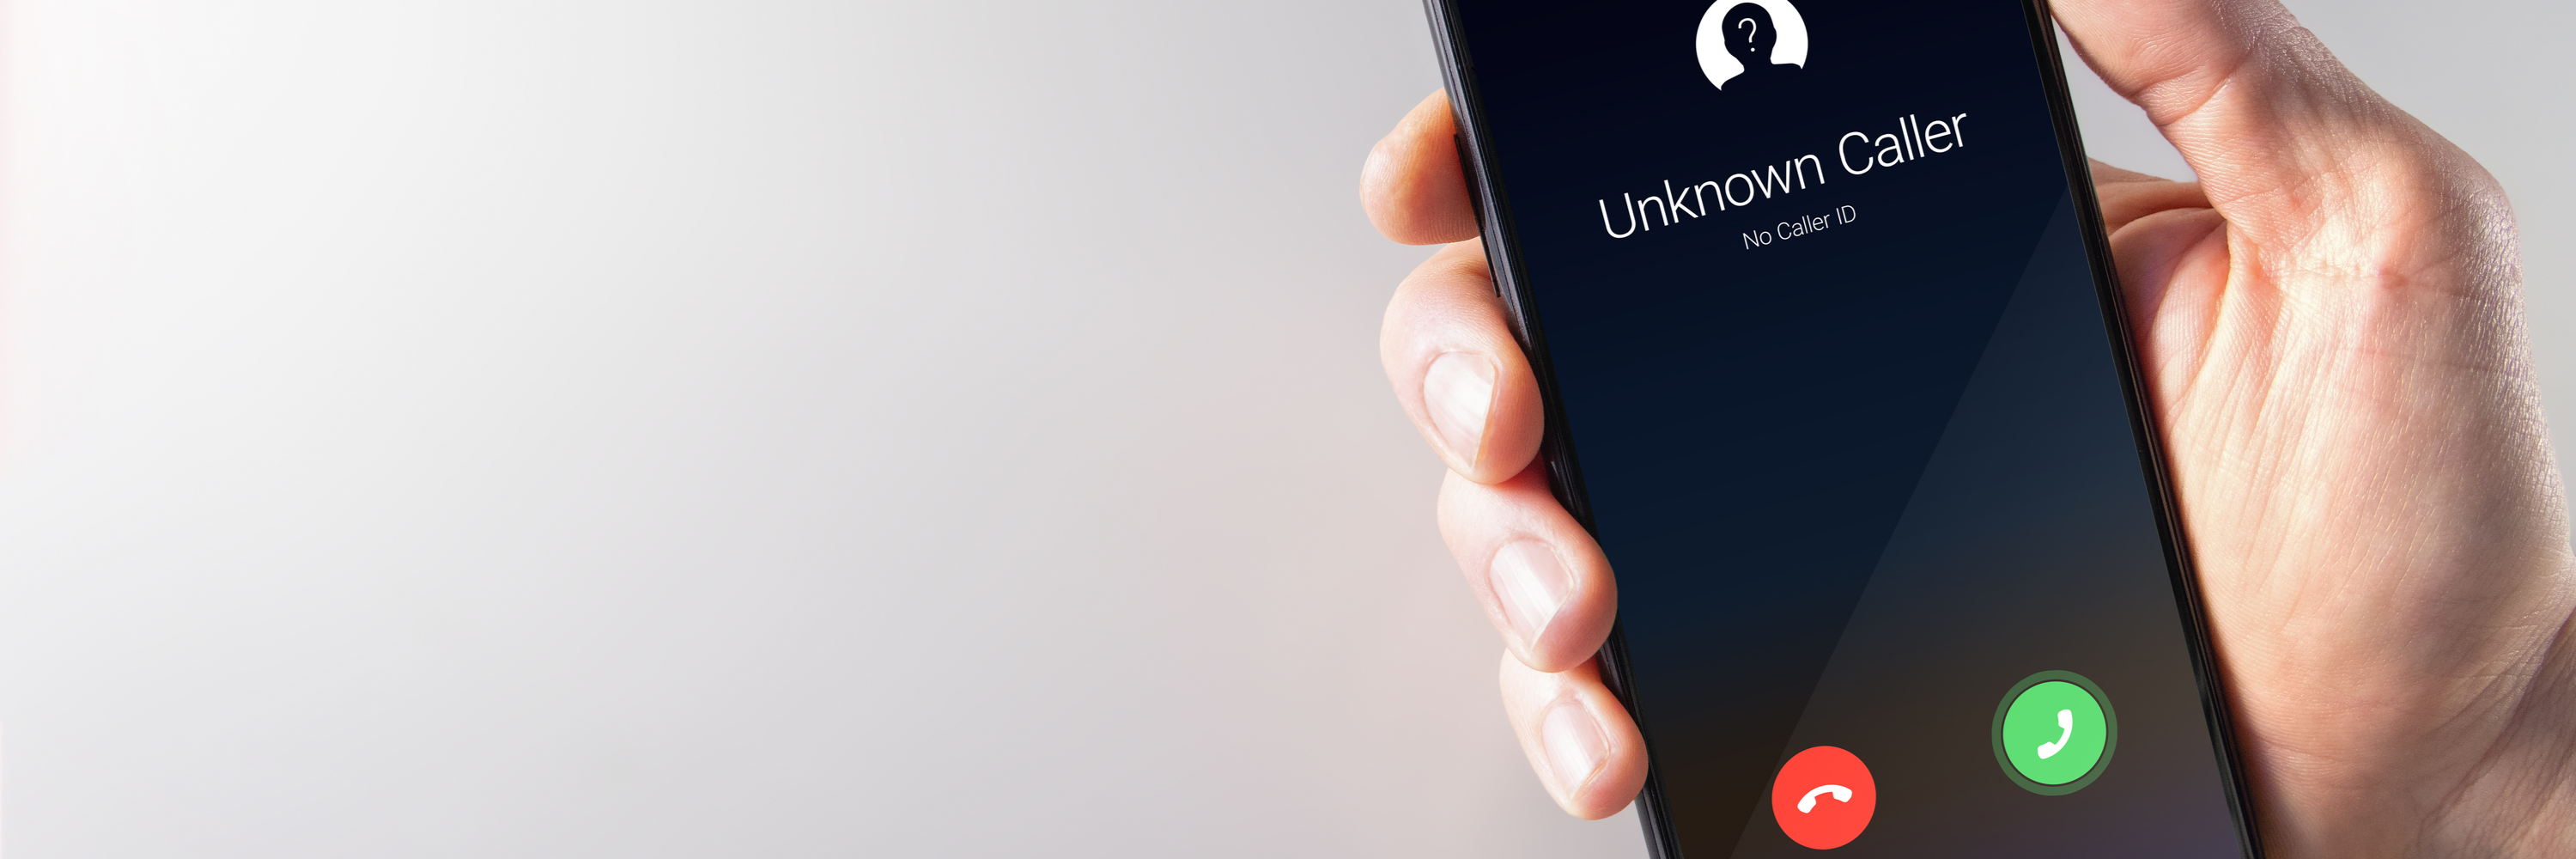 Hand holding a smartphone with unknown caller showing on caller ID